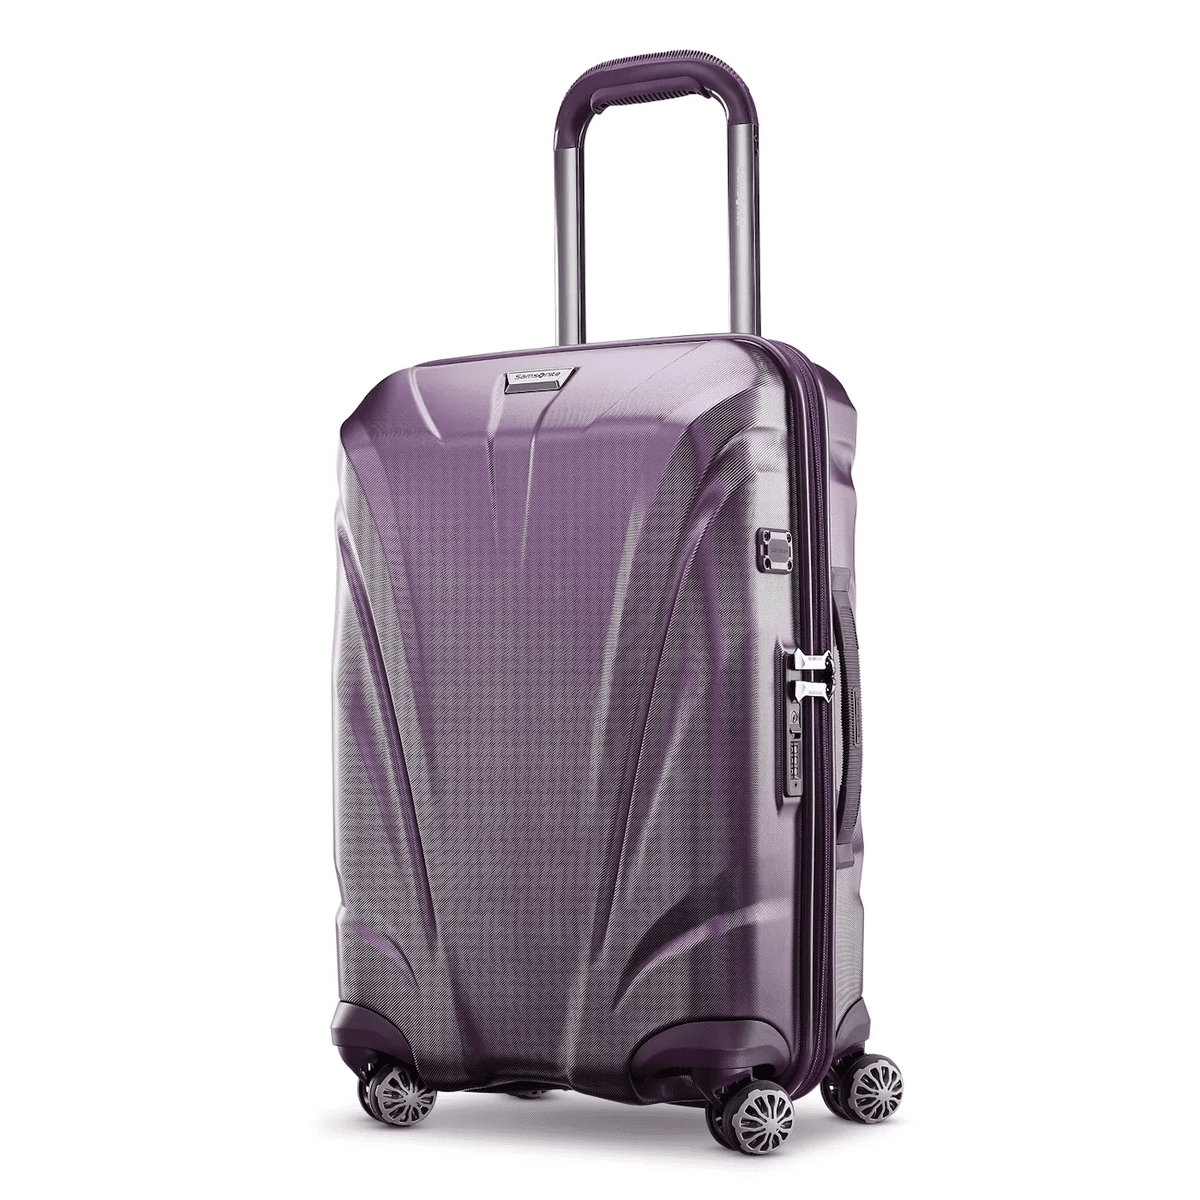 Best Early Luggage Deals